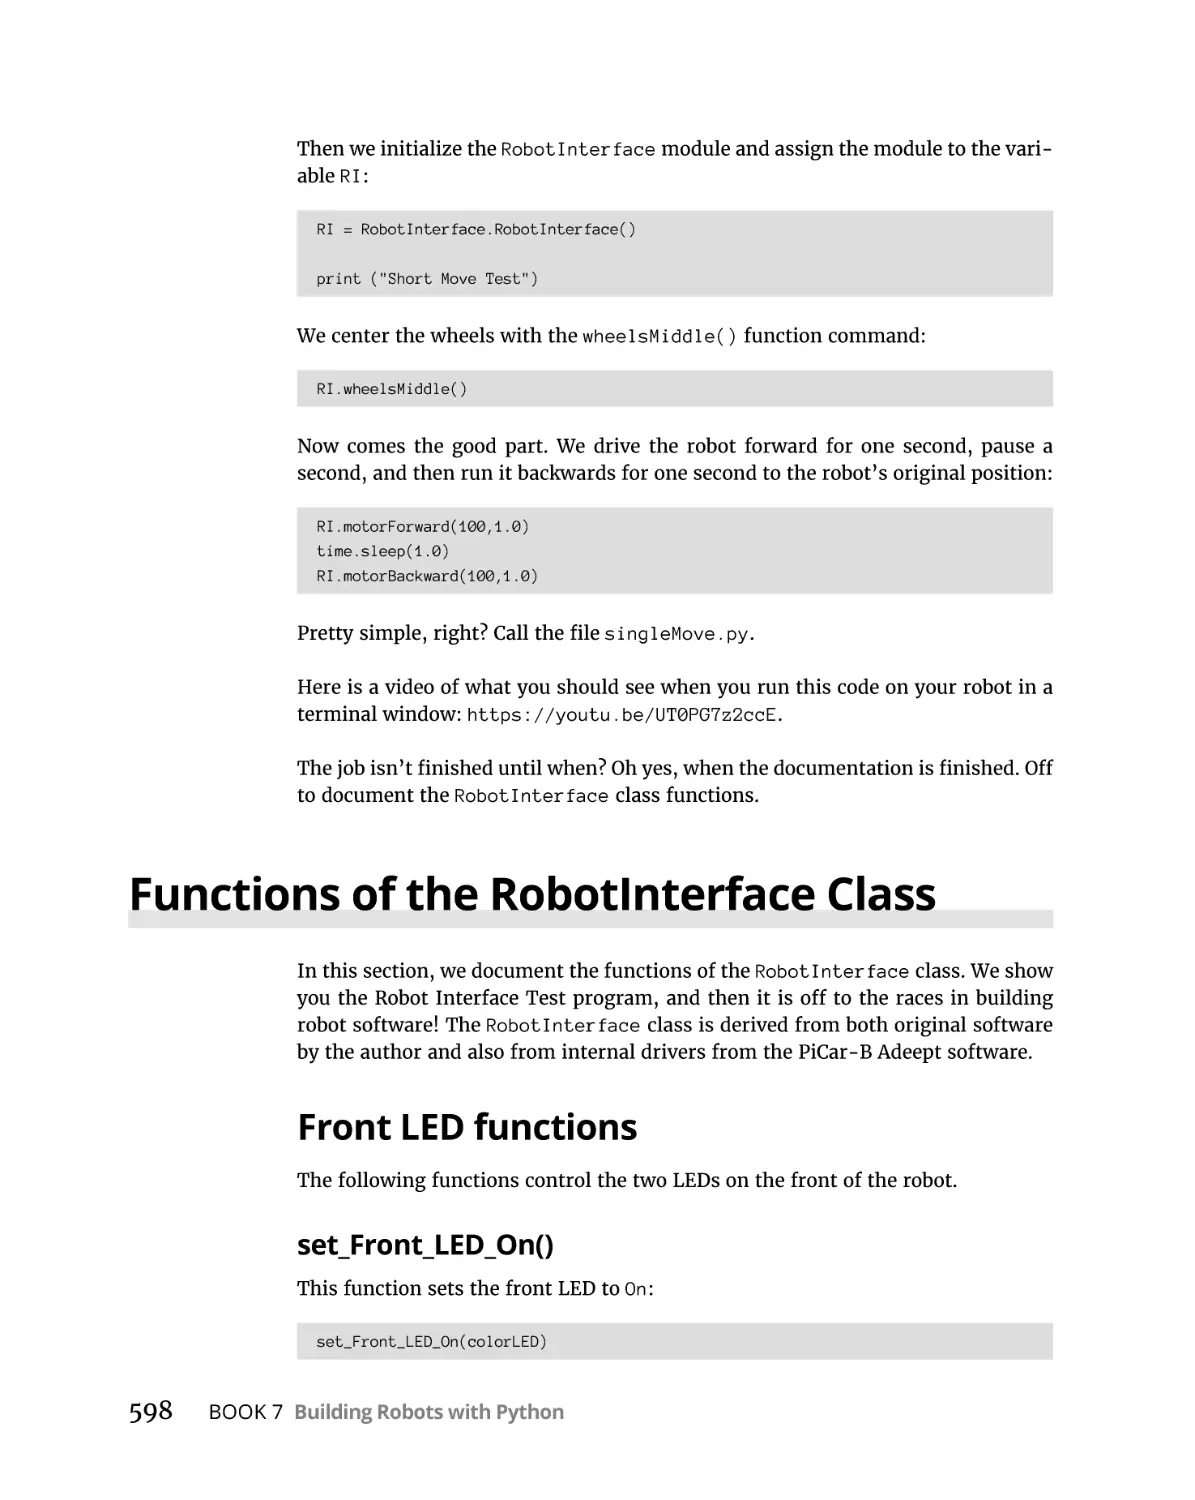 Functions of the RobotInterface Class
Front LED functions